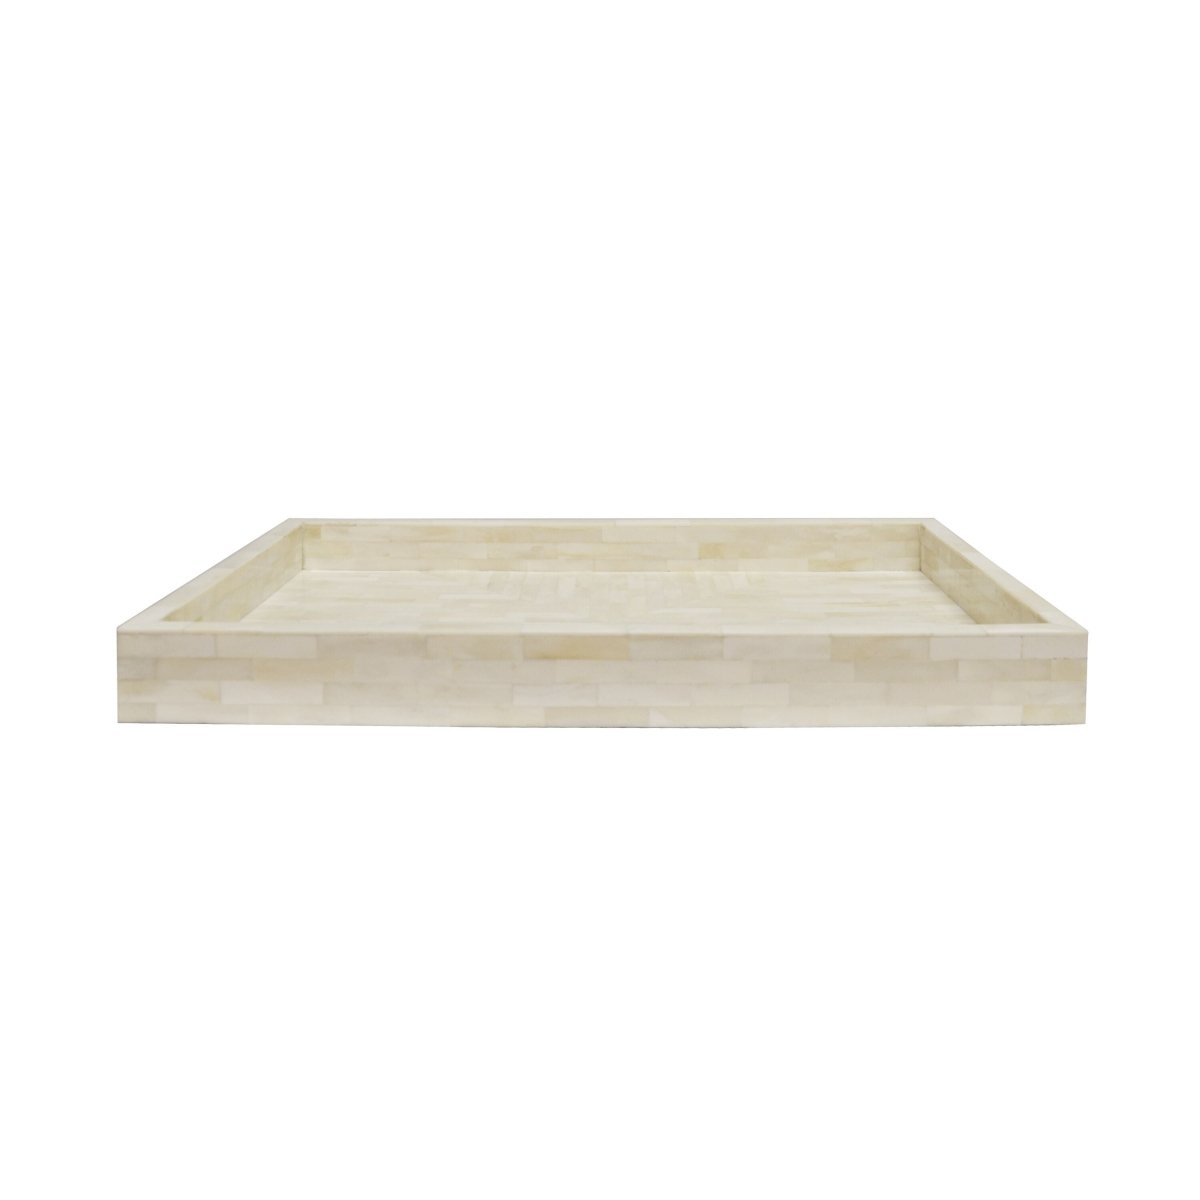 Simon Natural Bone Tray by Worlds Away | Fig Linens and Home